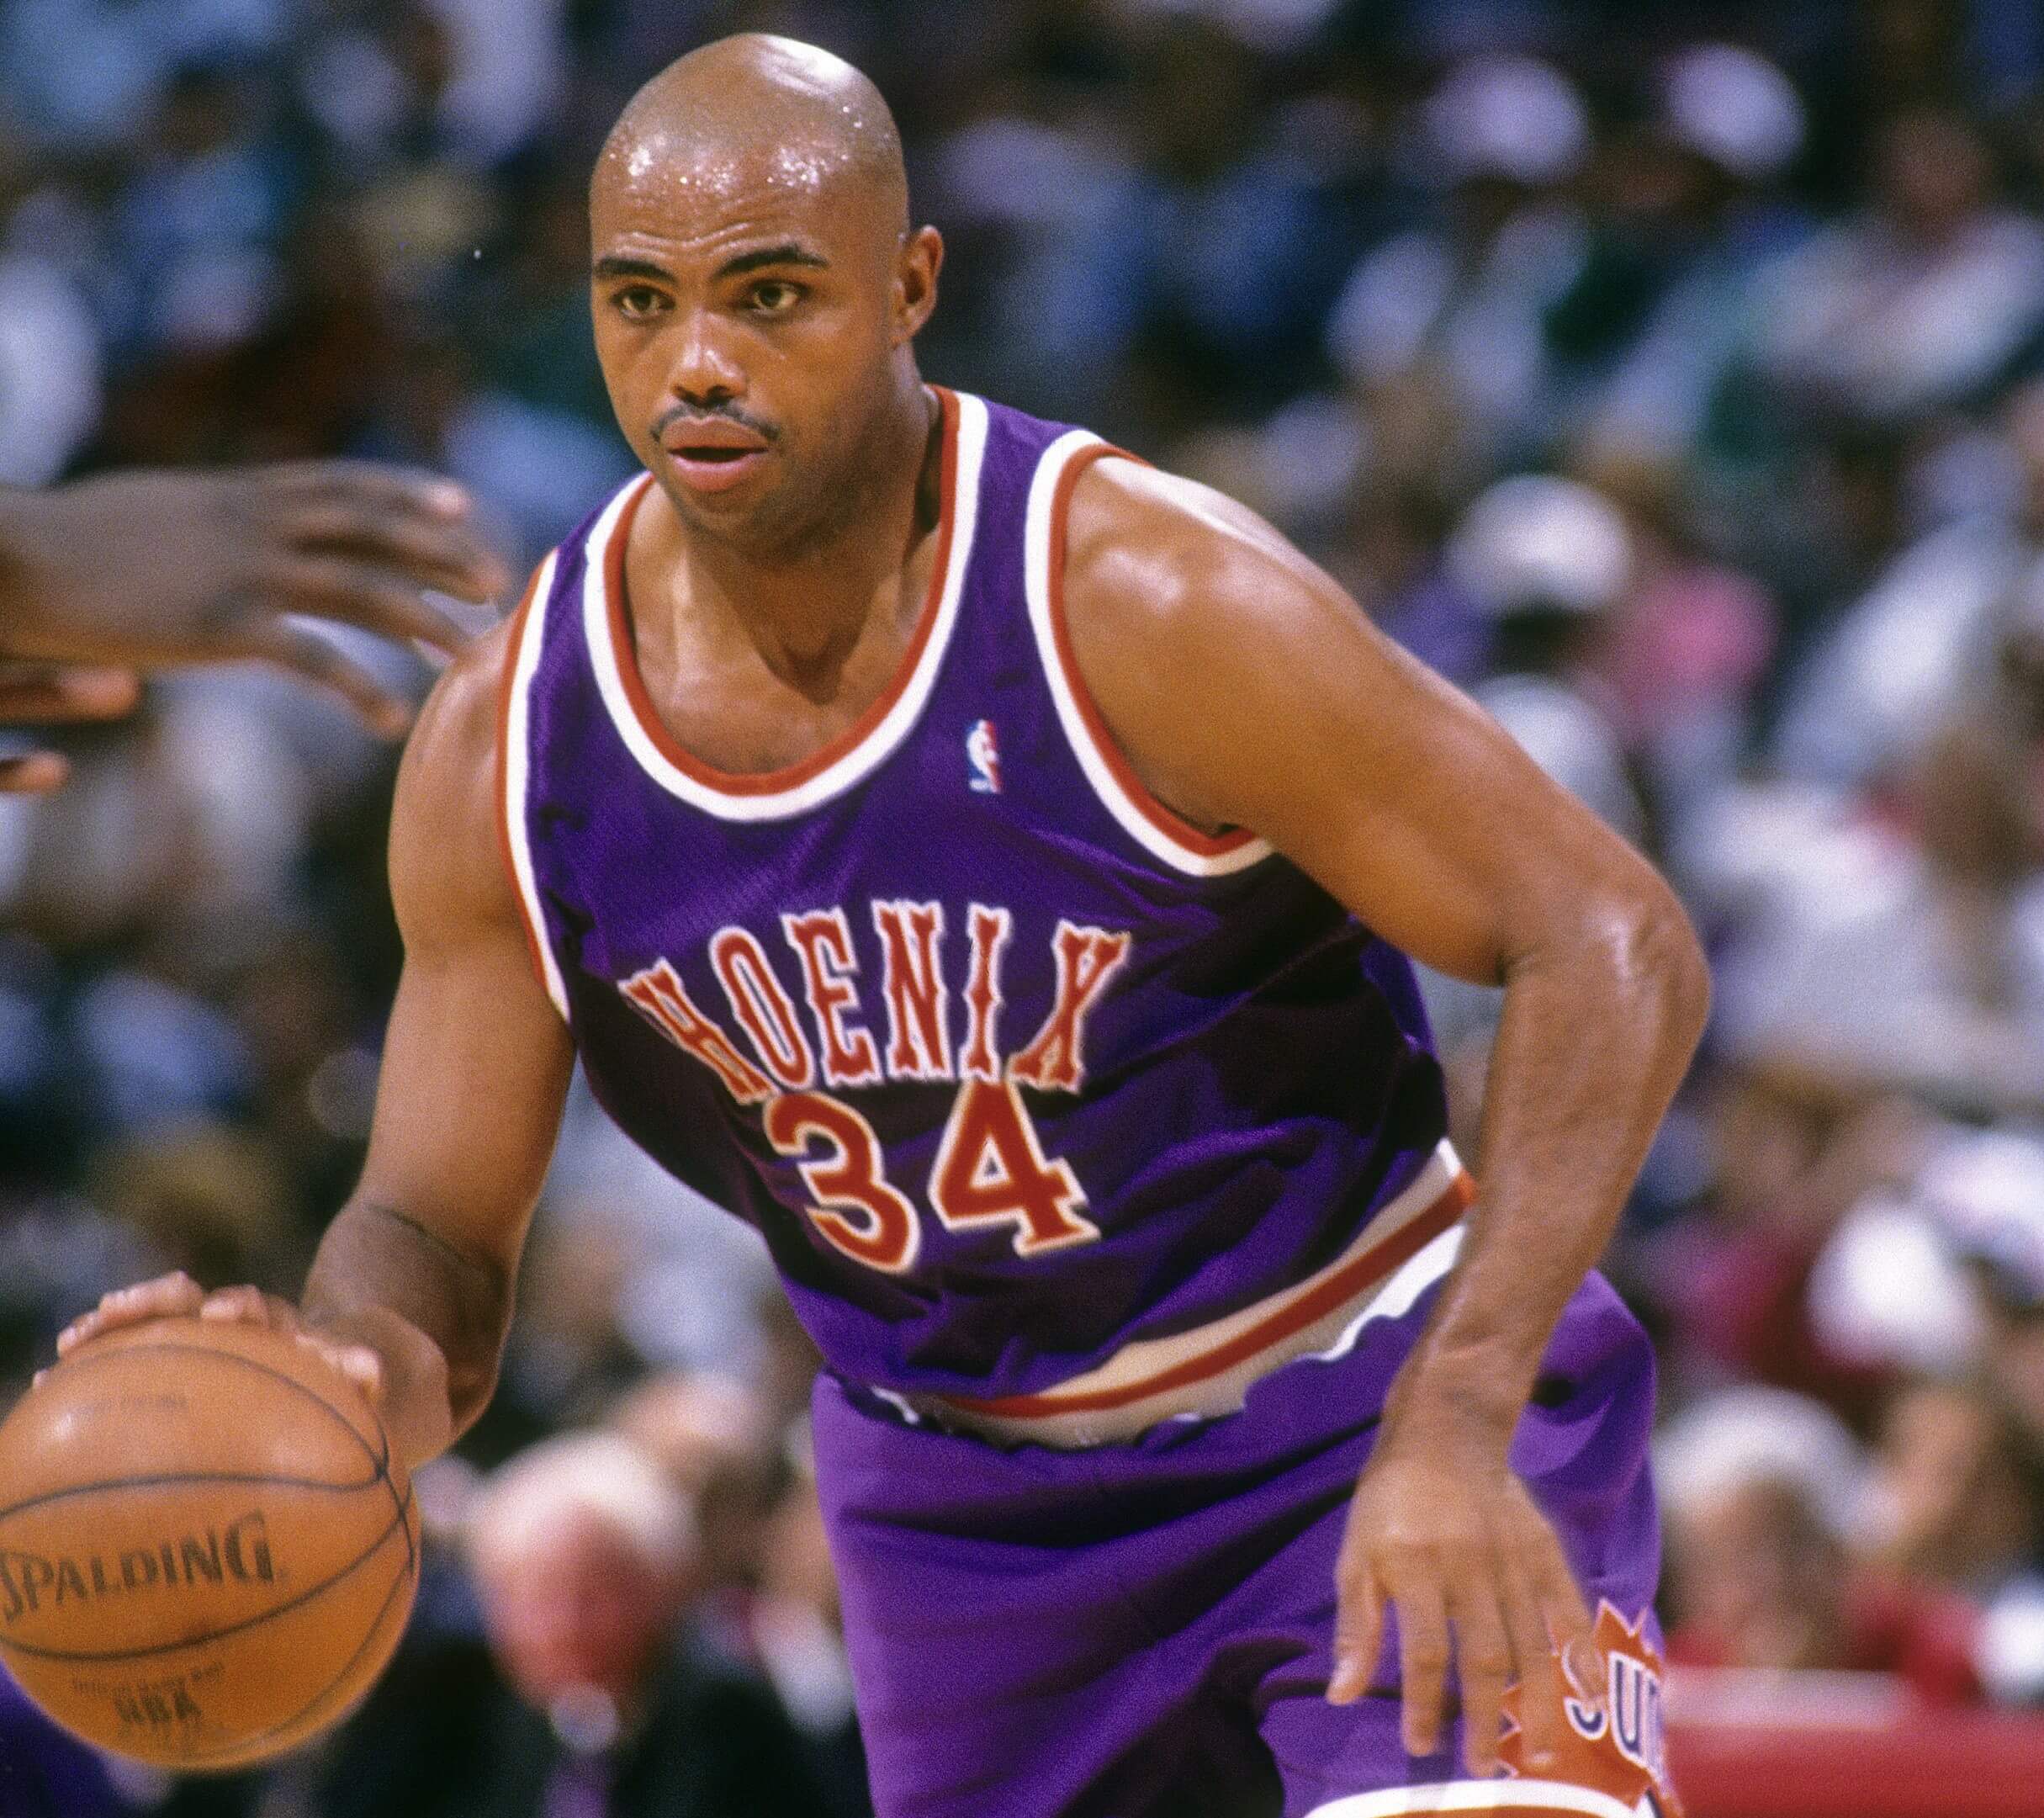 Charles Barkley of the Phoenix Suns in action.